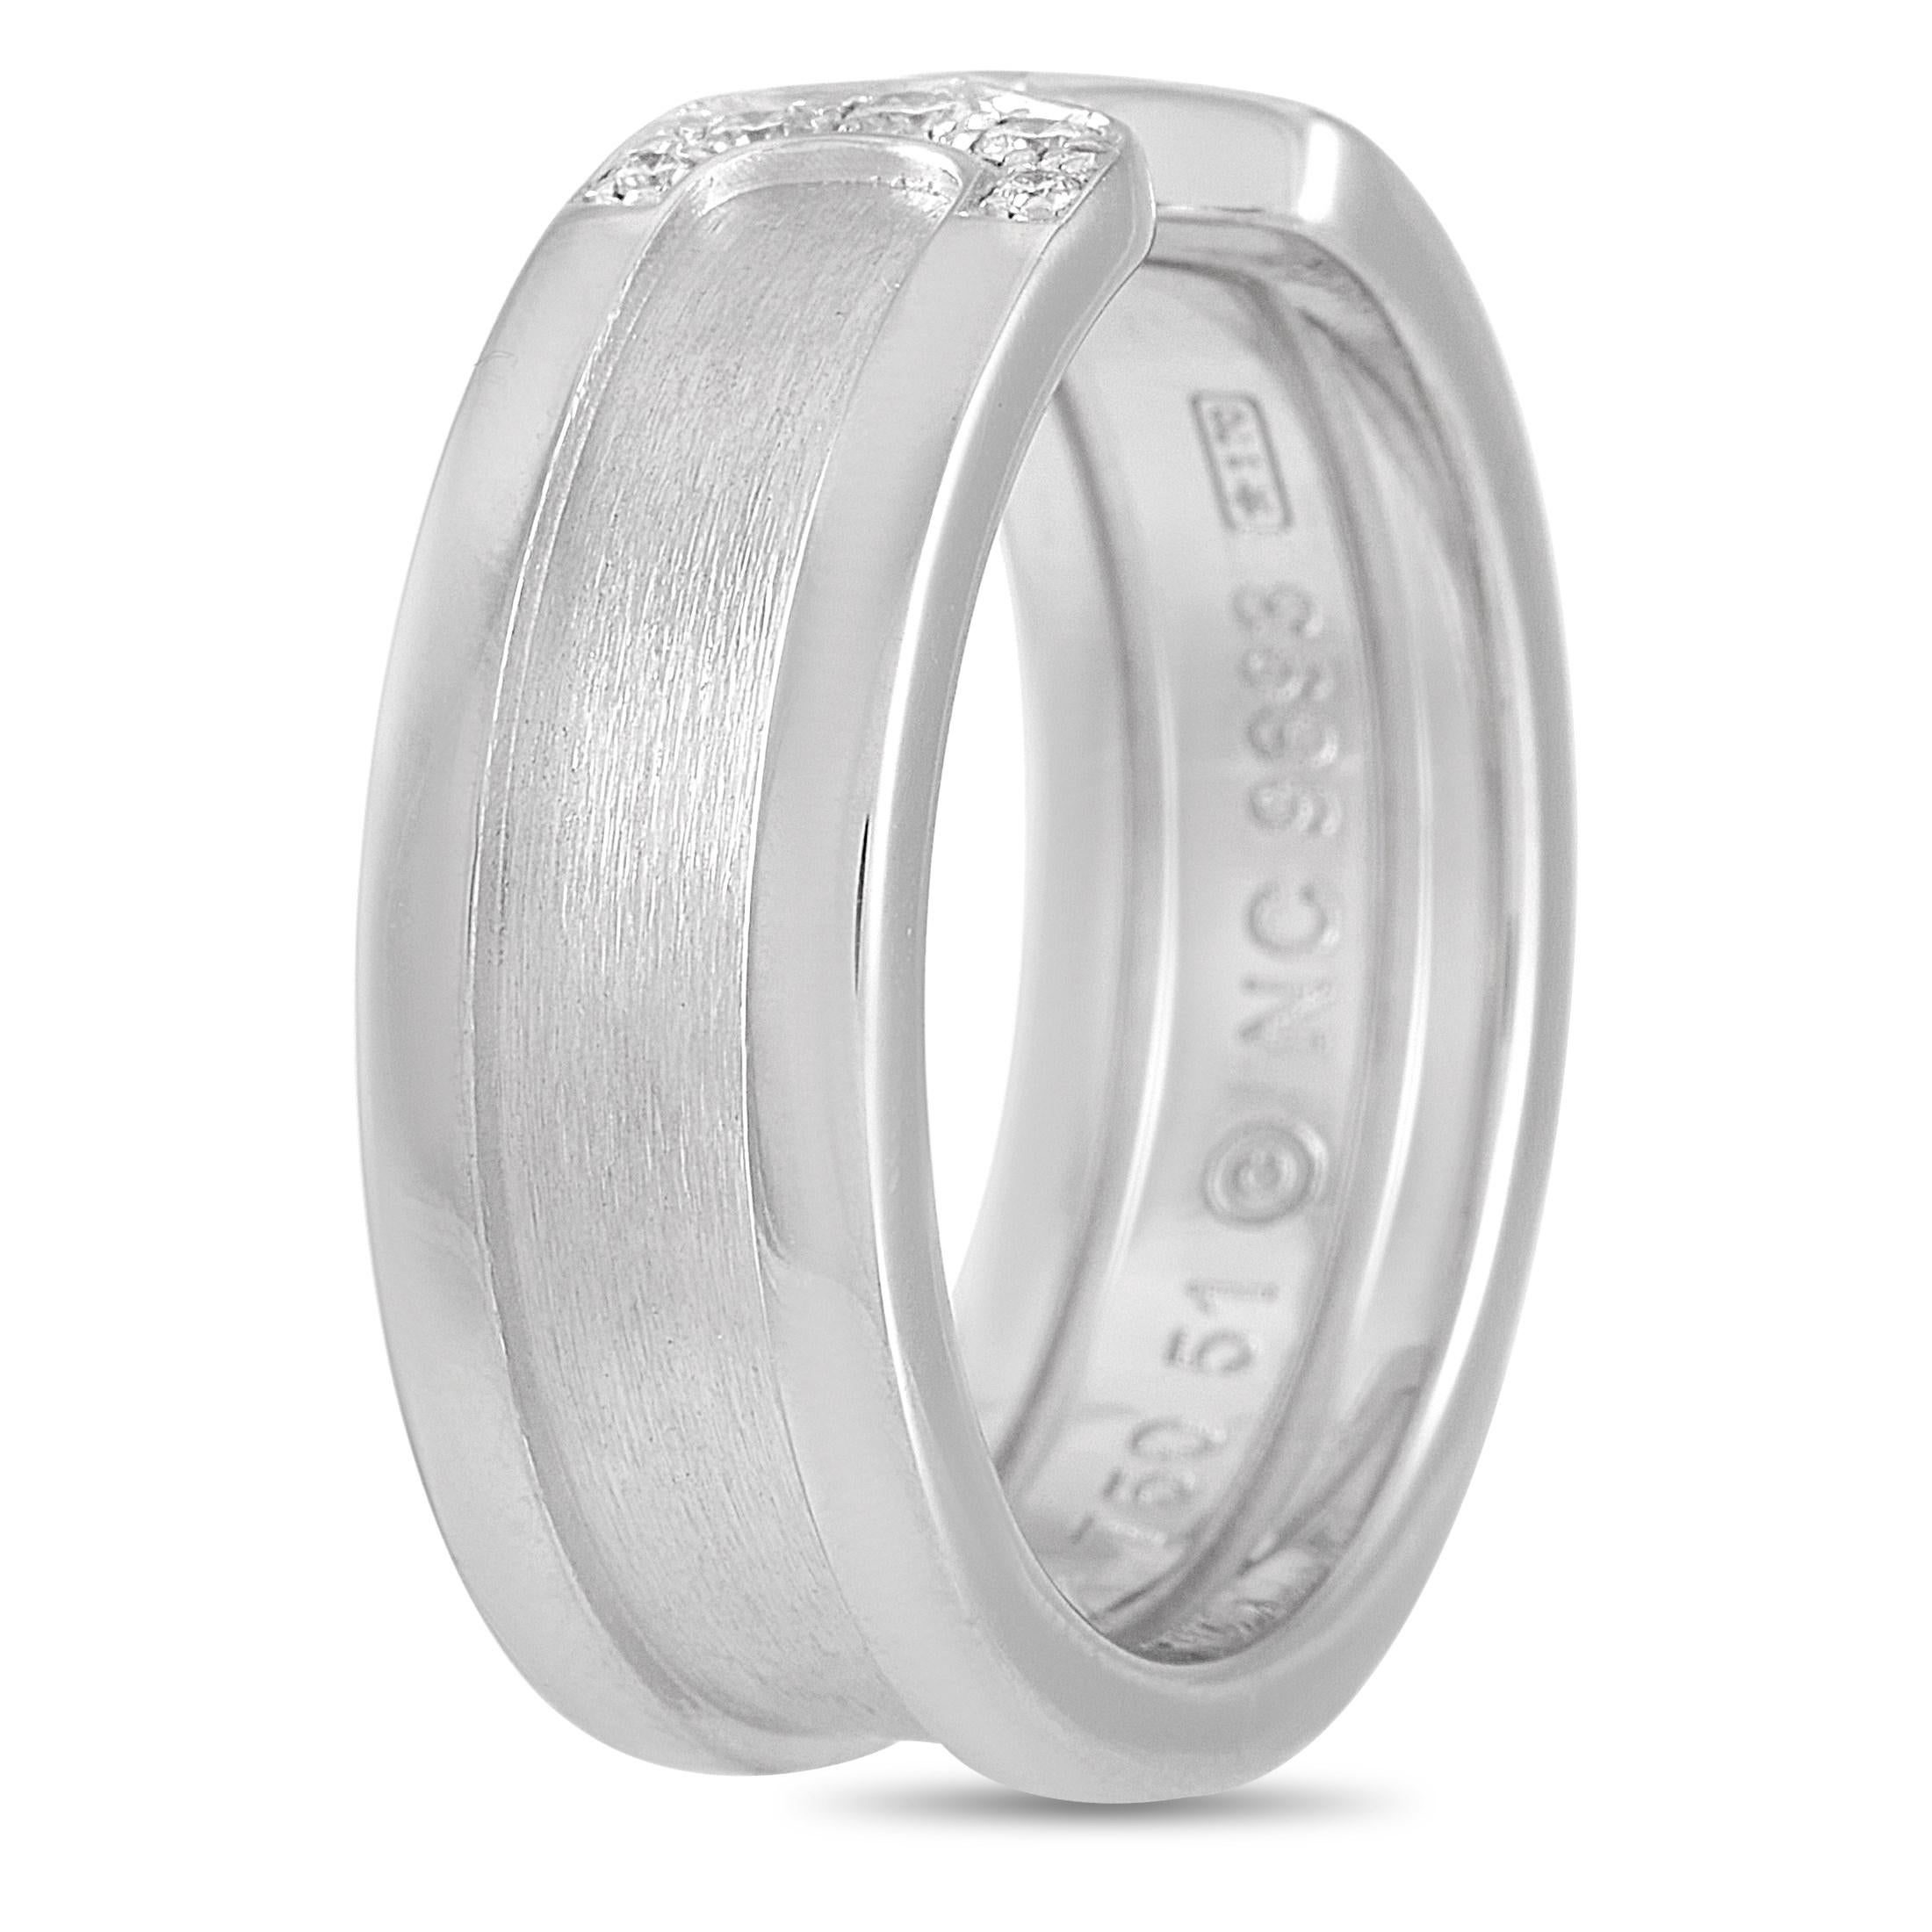 This Cartier 18K White Gold Double C Diamond Ring is decidedly modern while maintaining the signature Cartier style. The band is made with 18K white gold with a satin-finished indent around the middle of the band. At the ring's face, both sides come